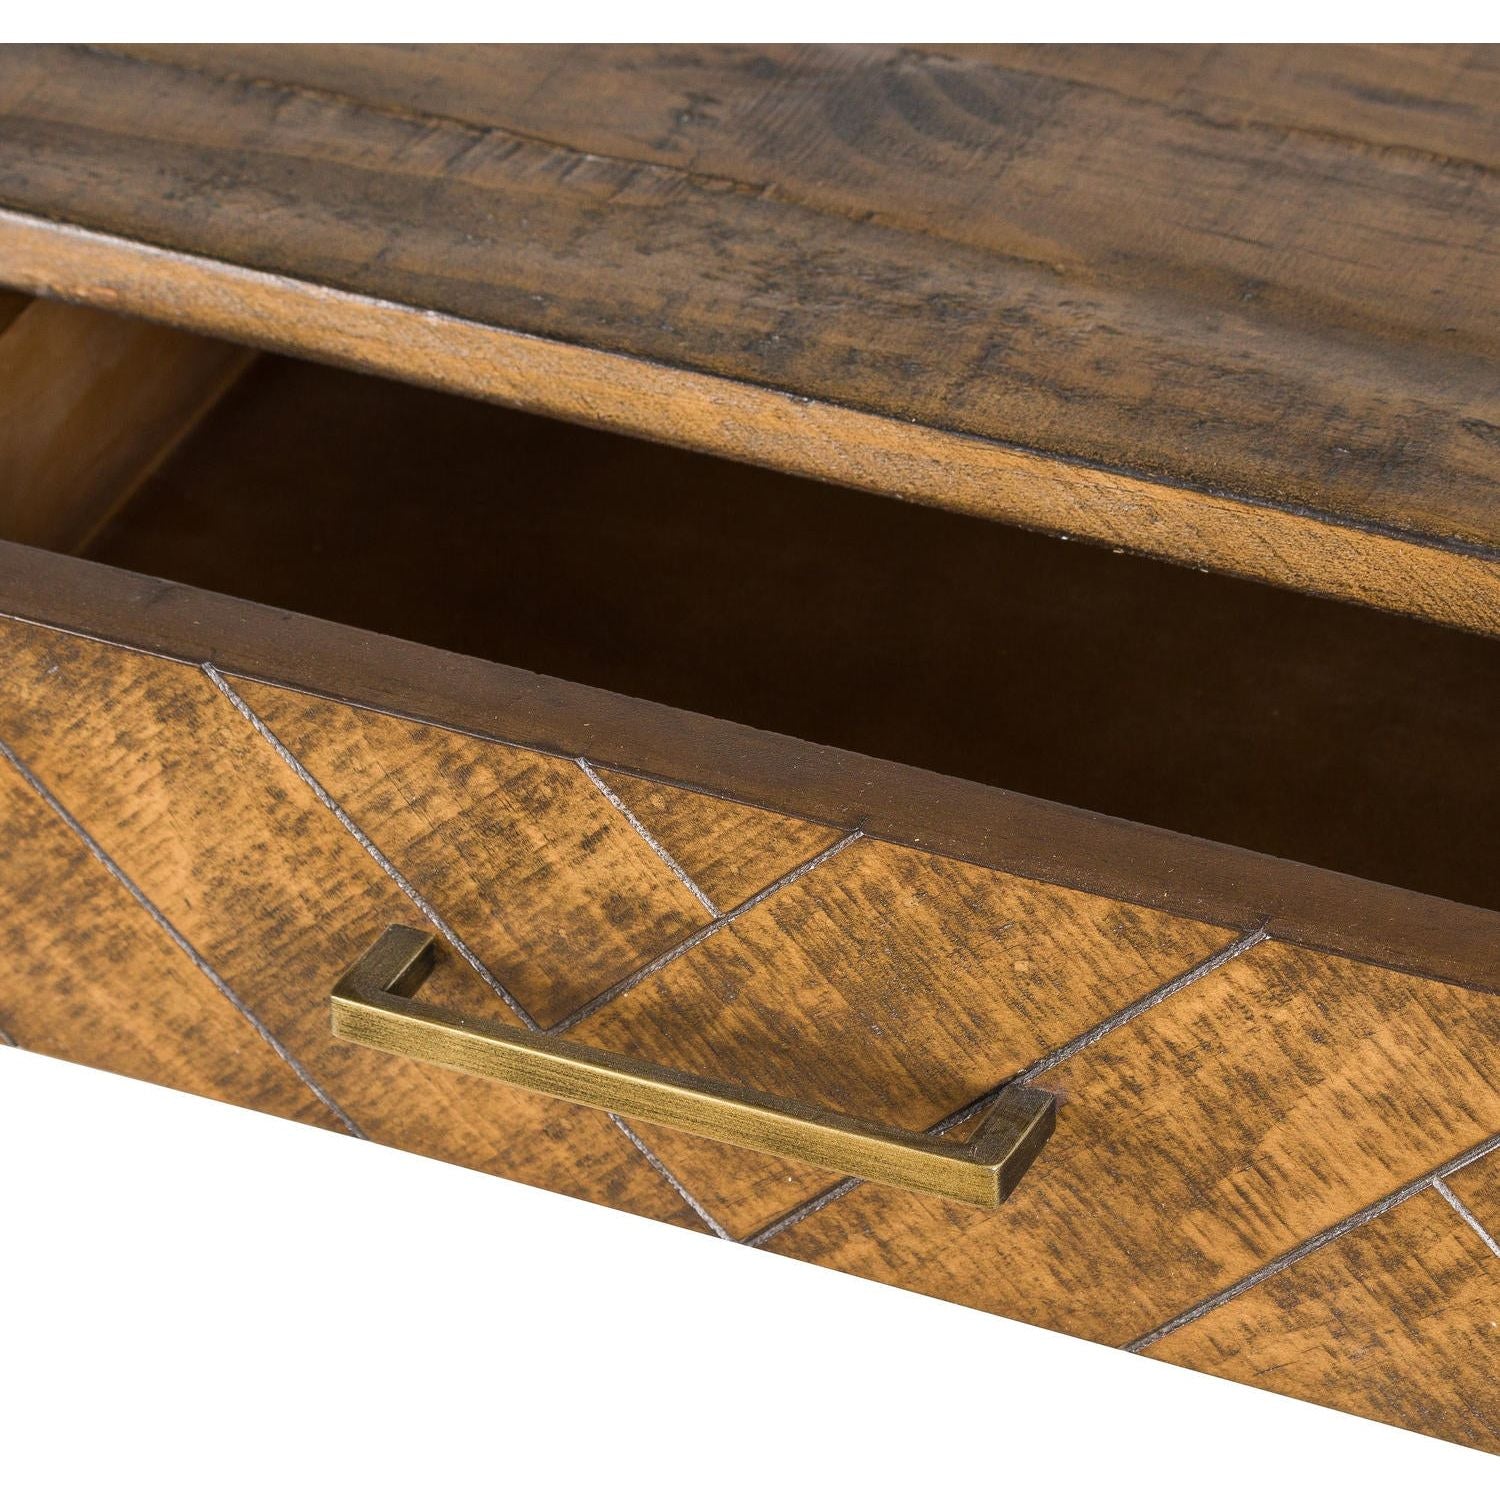 Havana Gold 2 Drawer Console Table - Ashton and Finch